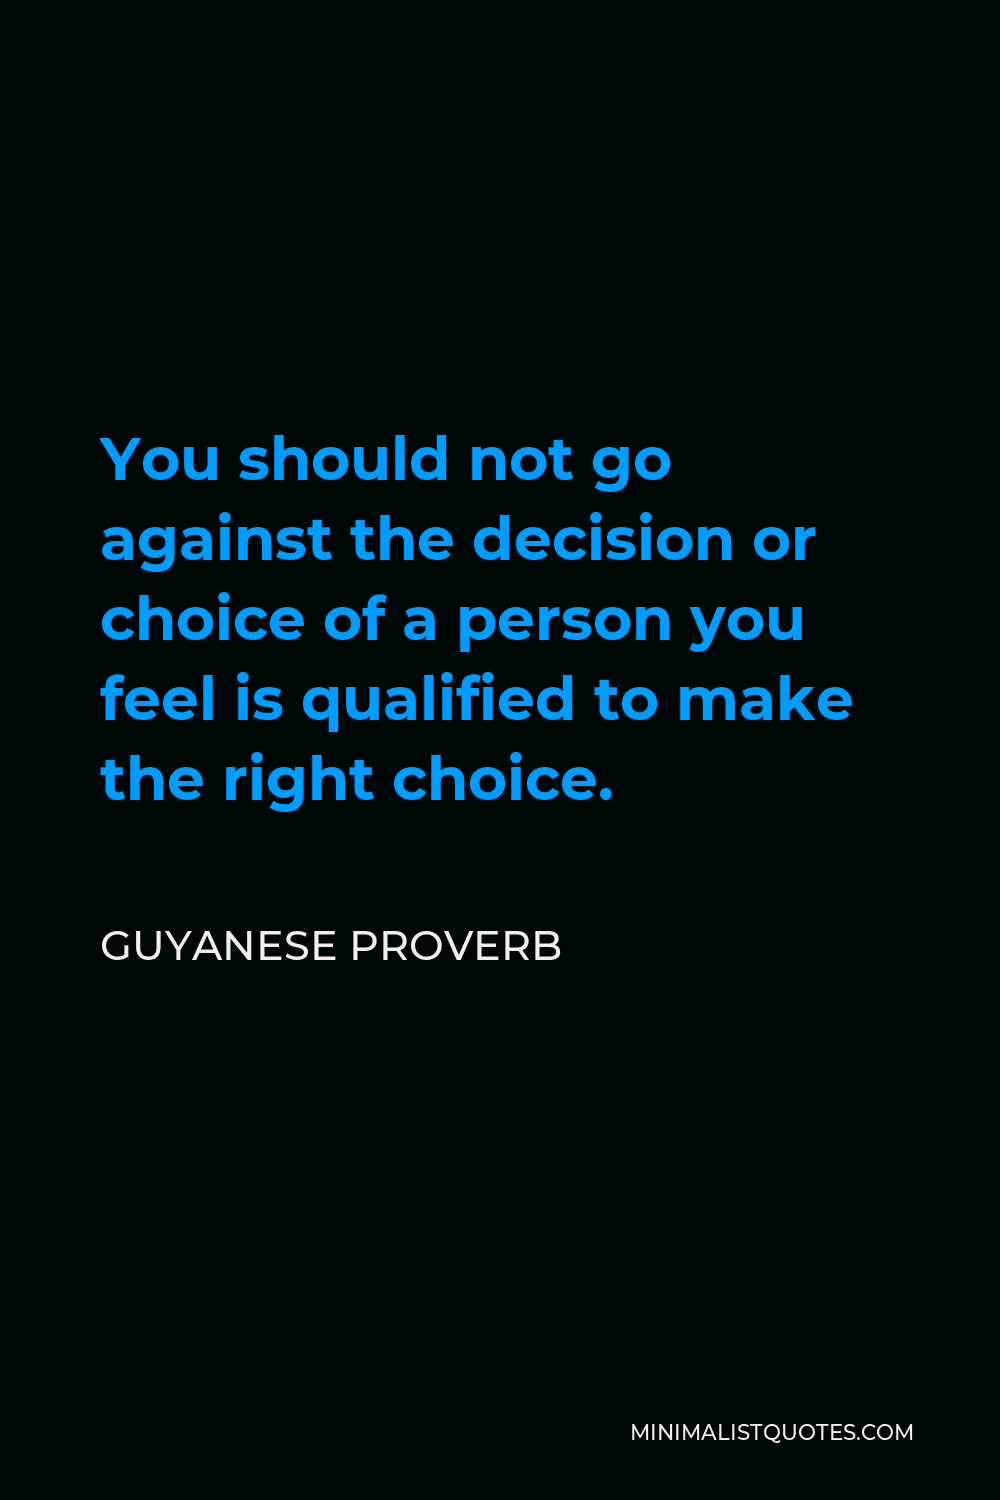 Guyanese Proverb Quote - You should not go against the decision or choice of a person you feel is qualified to make the right choice.